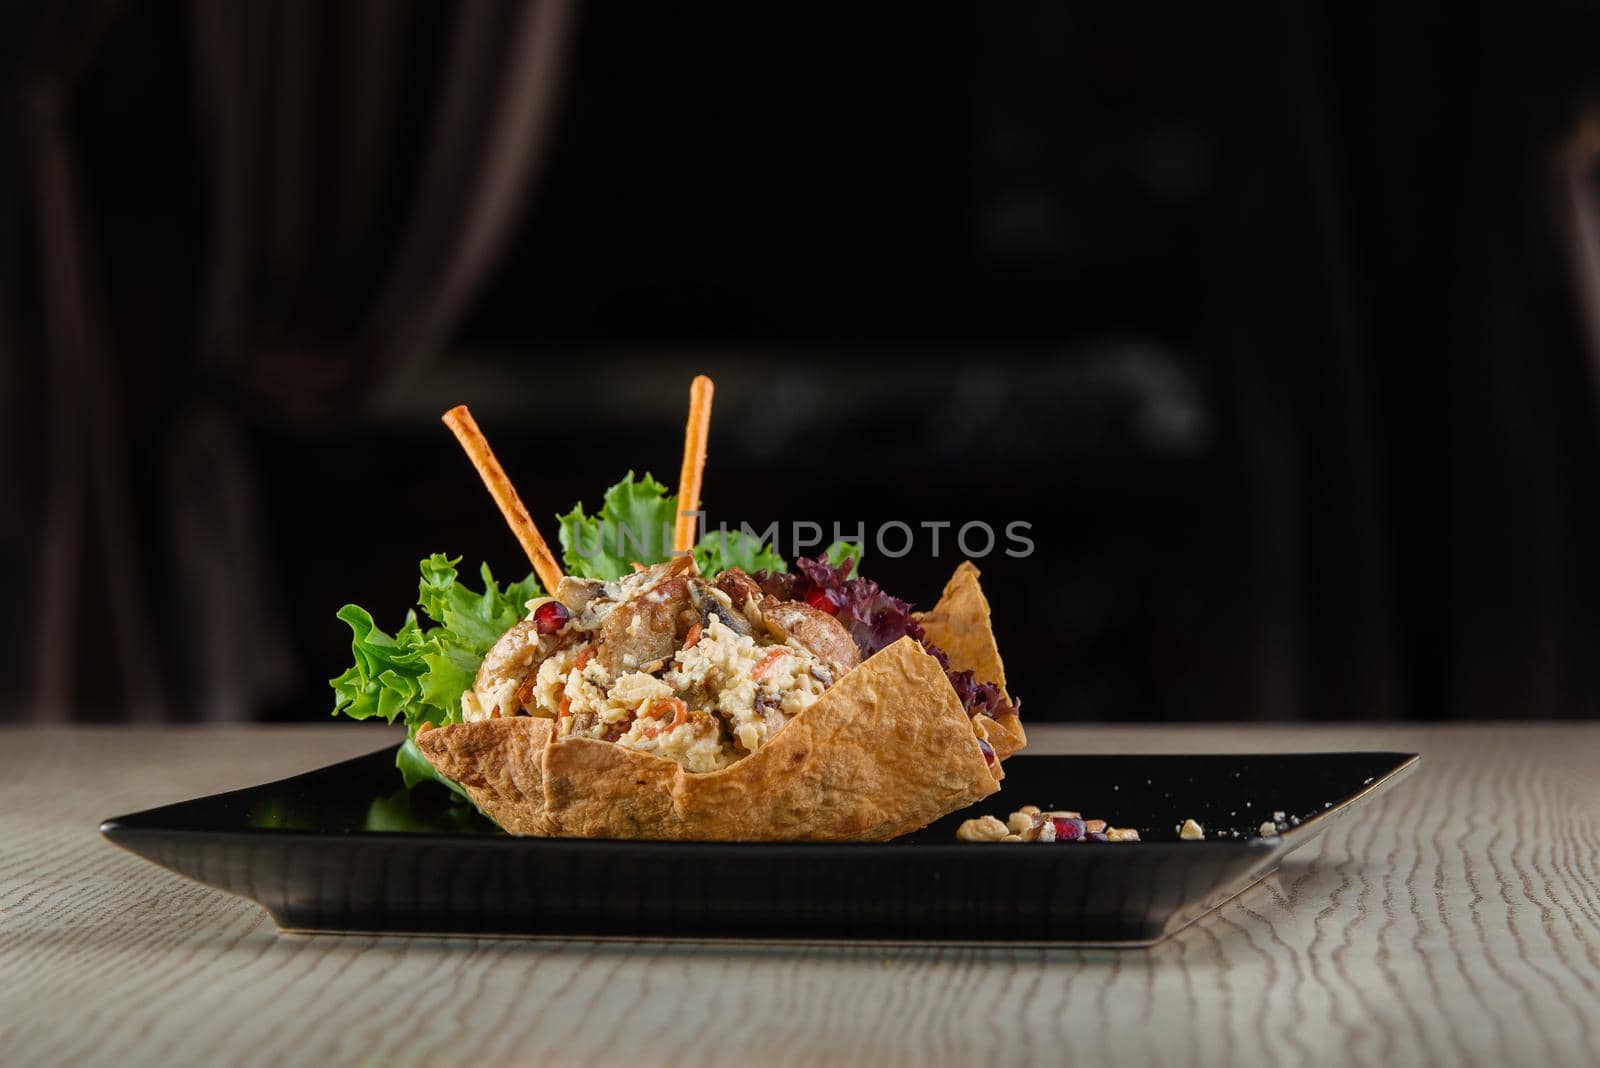 Pilaf in the form of fried pita bread, garnished with bread sticks and lettuce on a black square plate on a white wooden table.